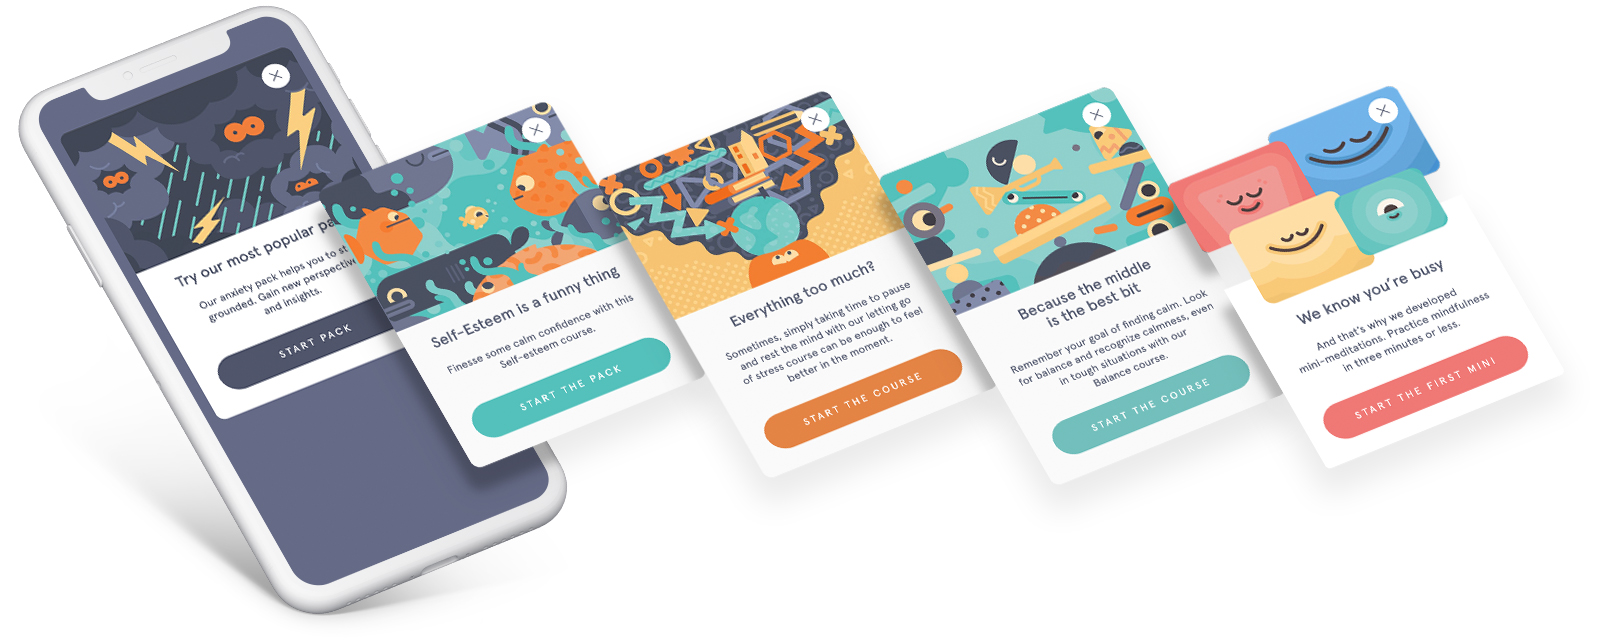 Headspace retention case study in app